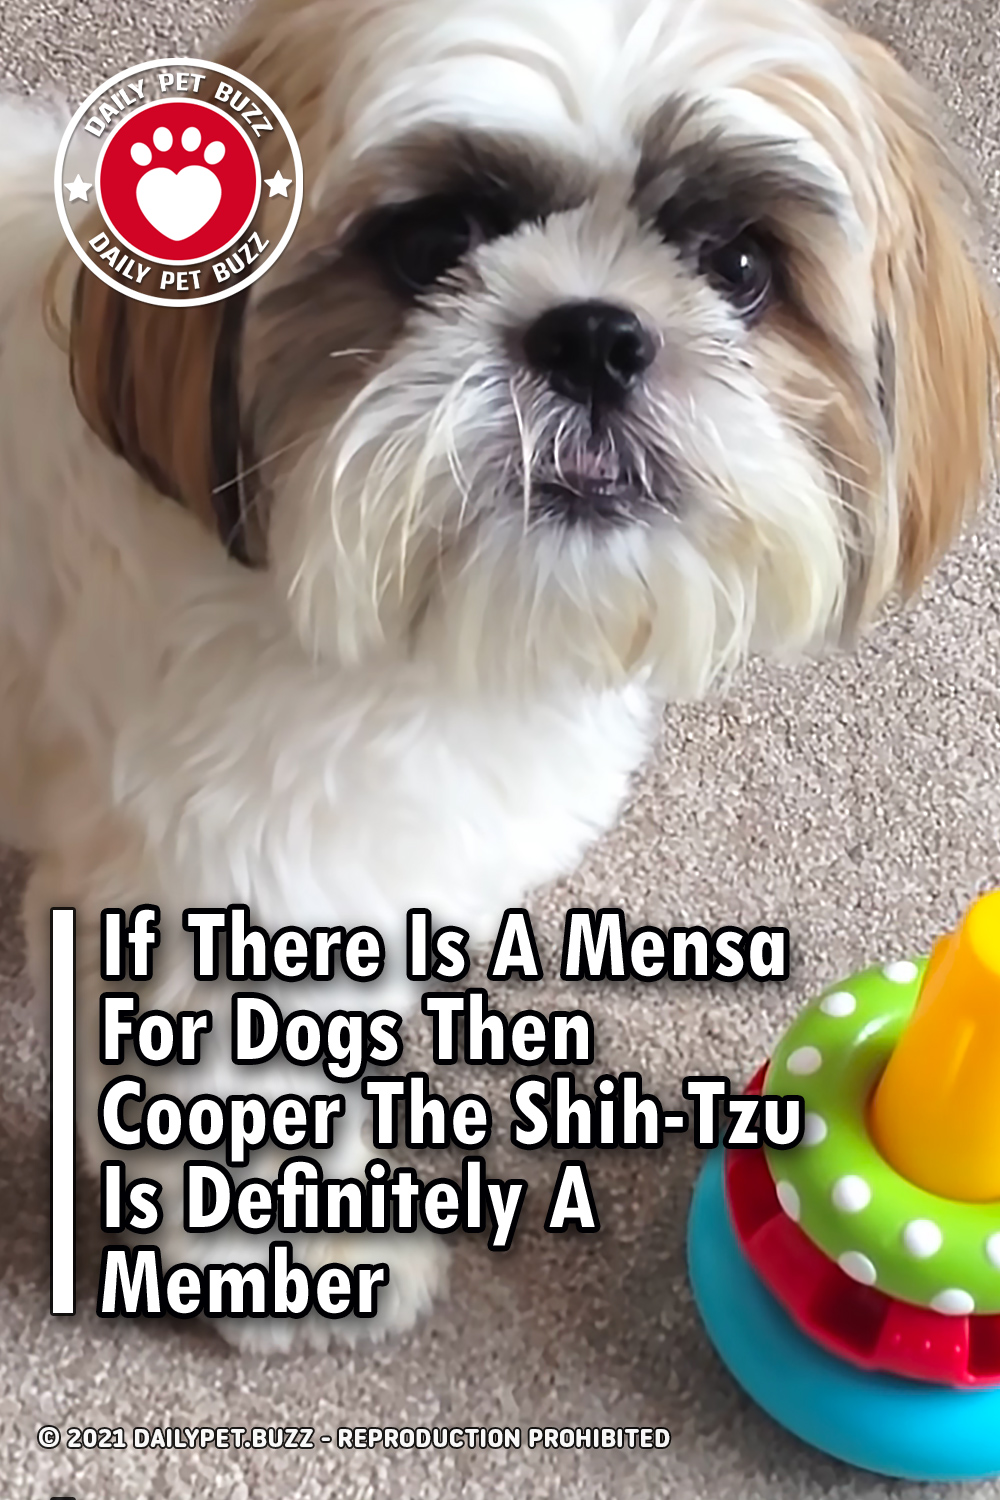 If There Is A Mensa For Dogs Then Cooper The Shih-Tzu Is Definitely A Member